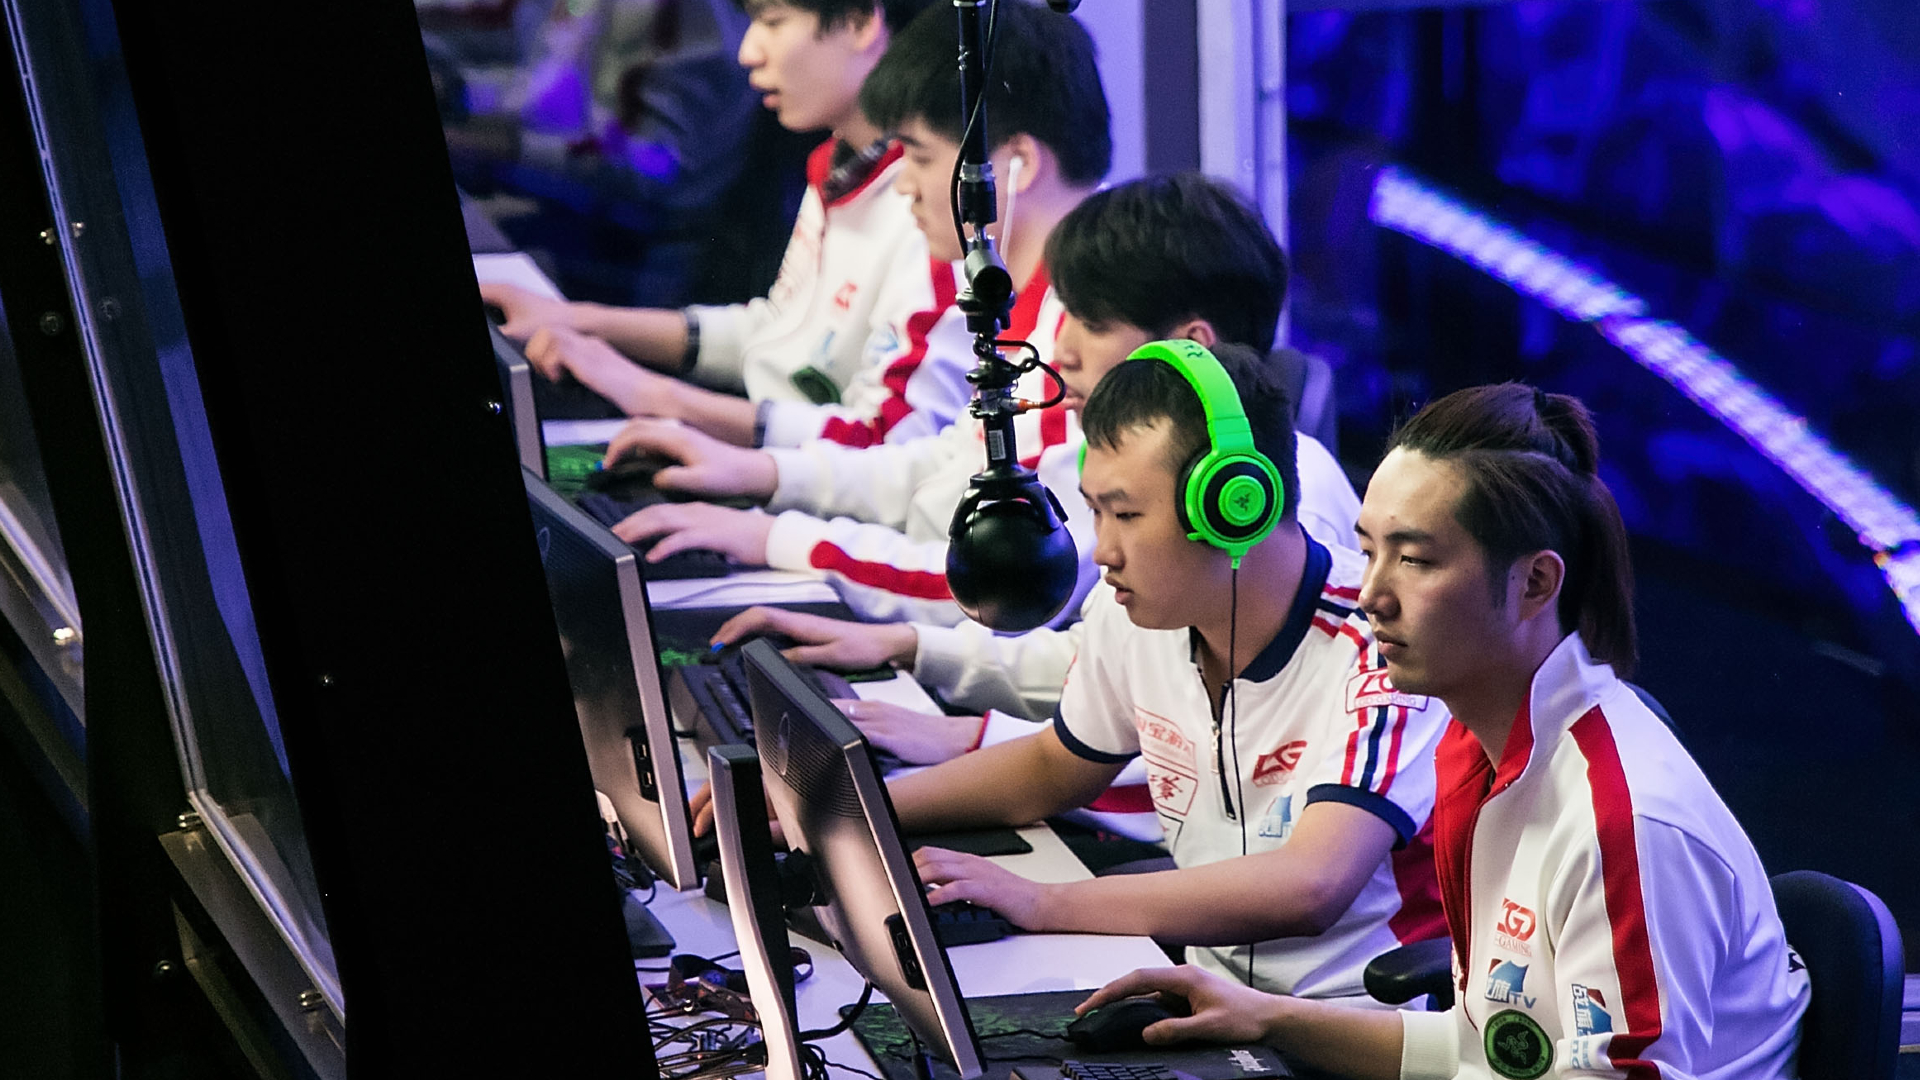 Yao and Rabbit of LGD Gaming compete at The International DOTA 2 Champsionships at Key Arena on July 19, 2014 in Seattle, Washington.